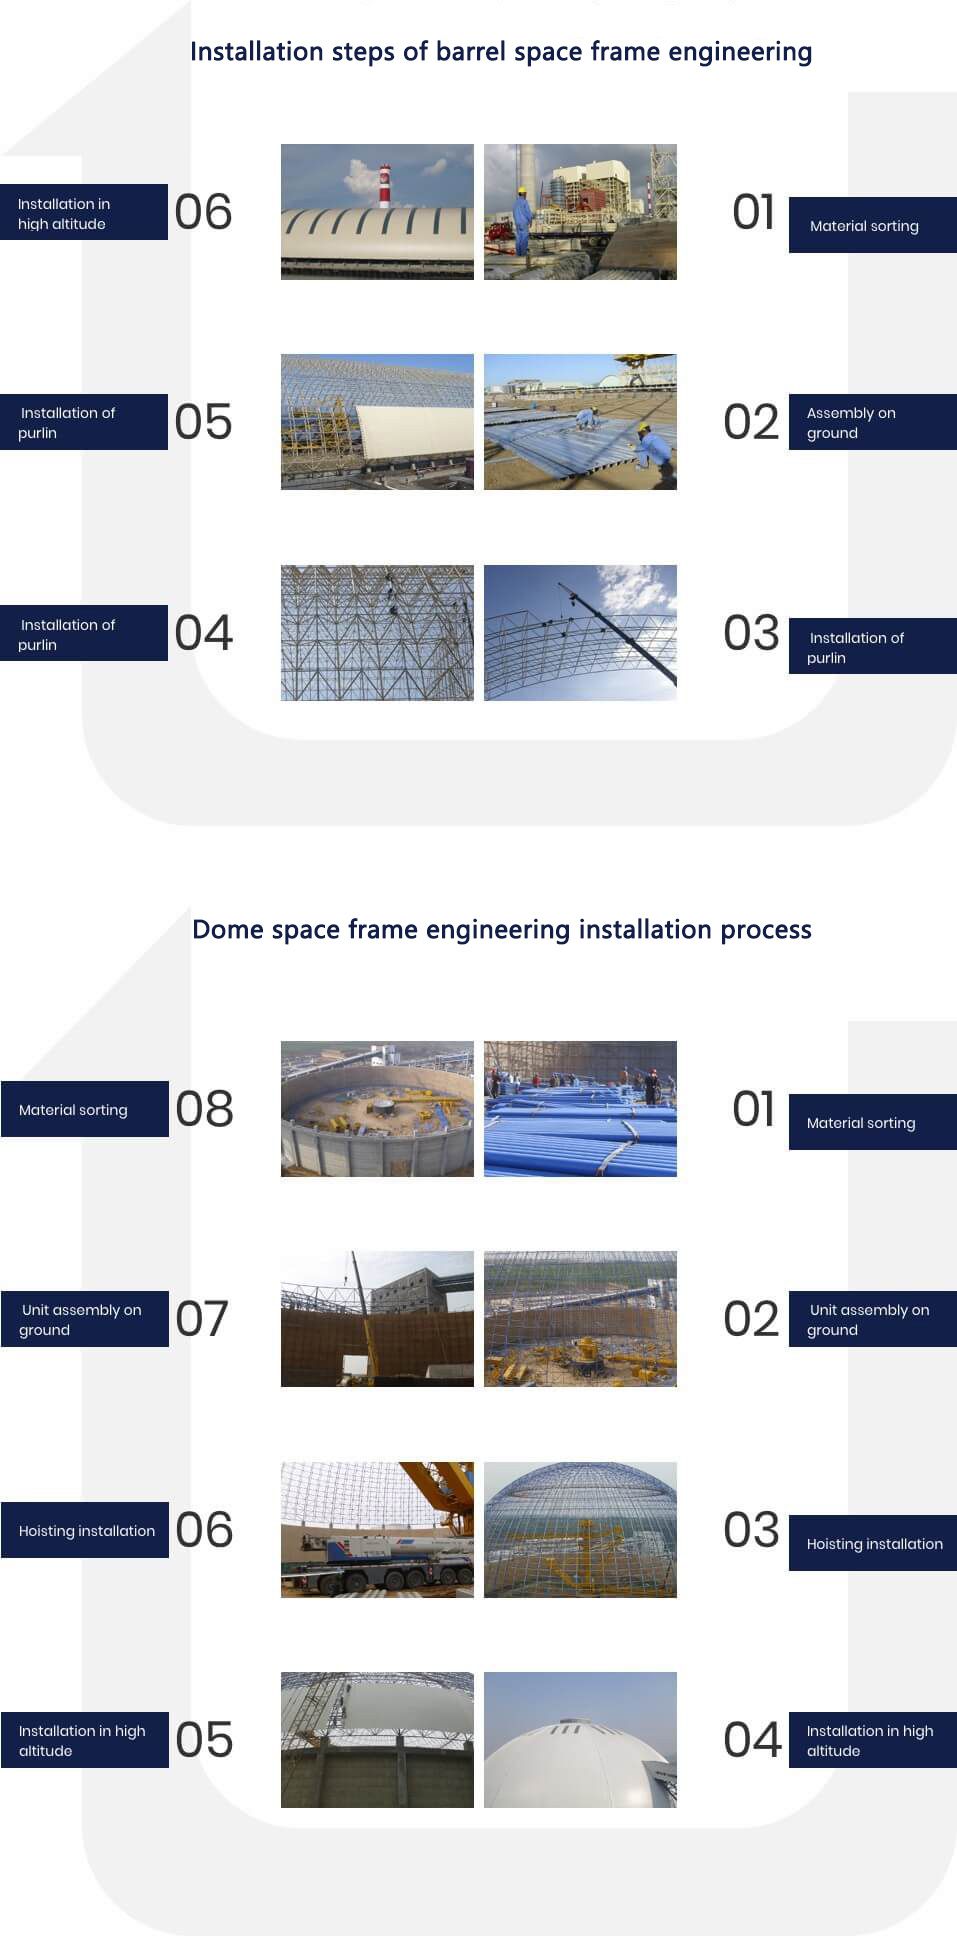  space frame engineering installation